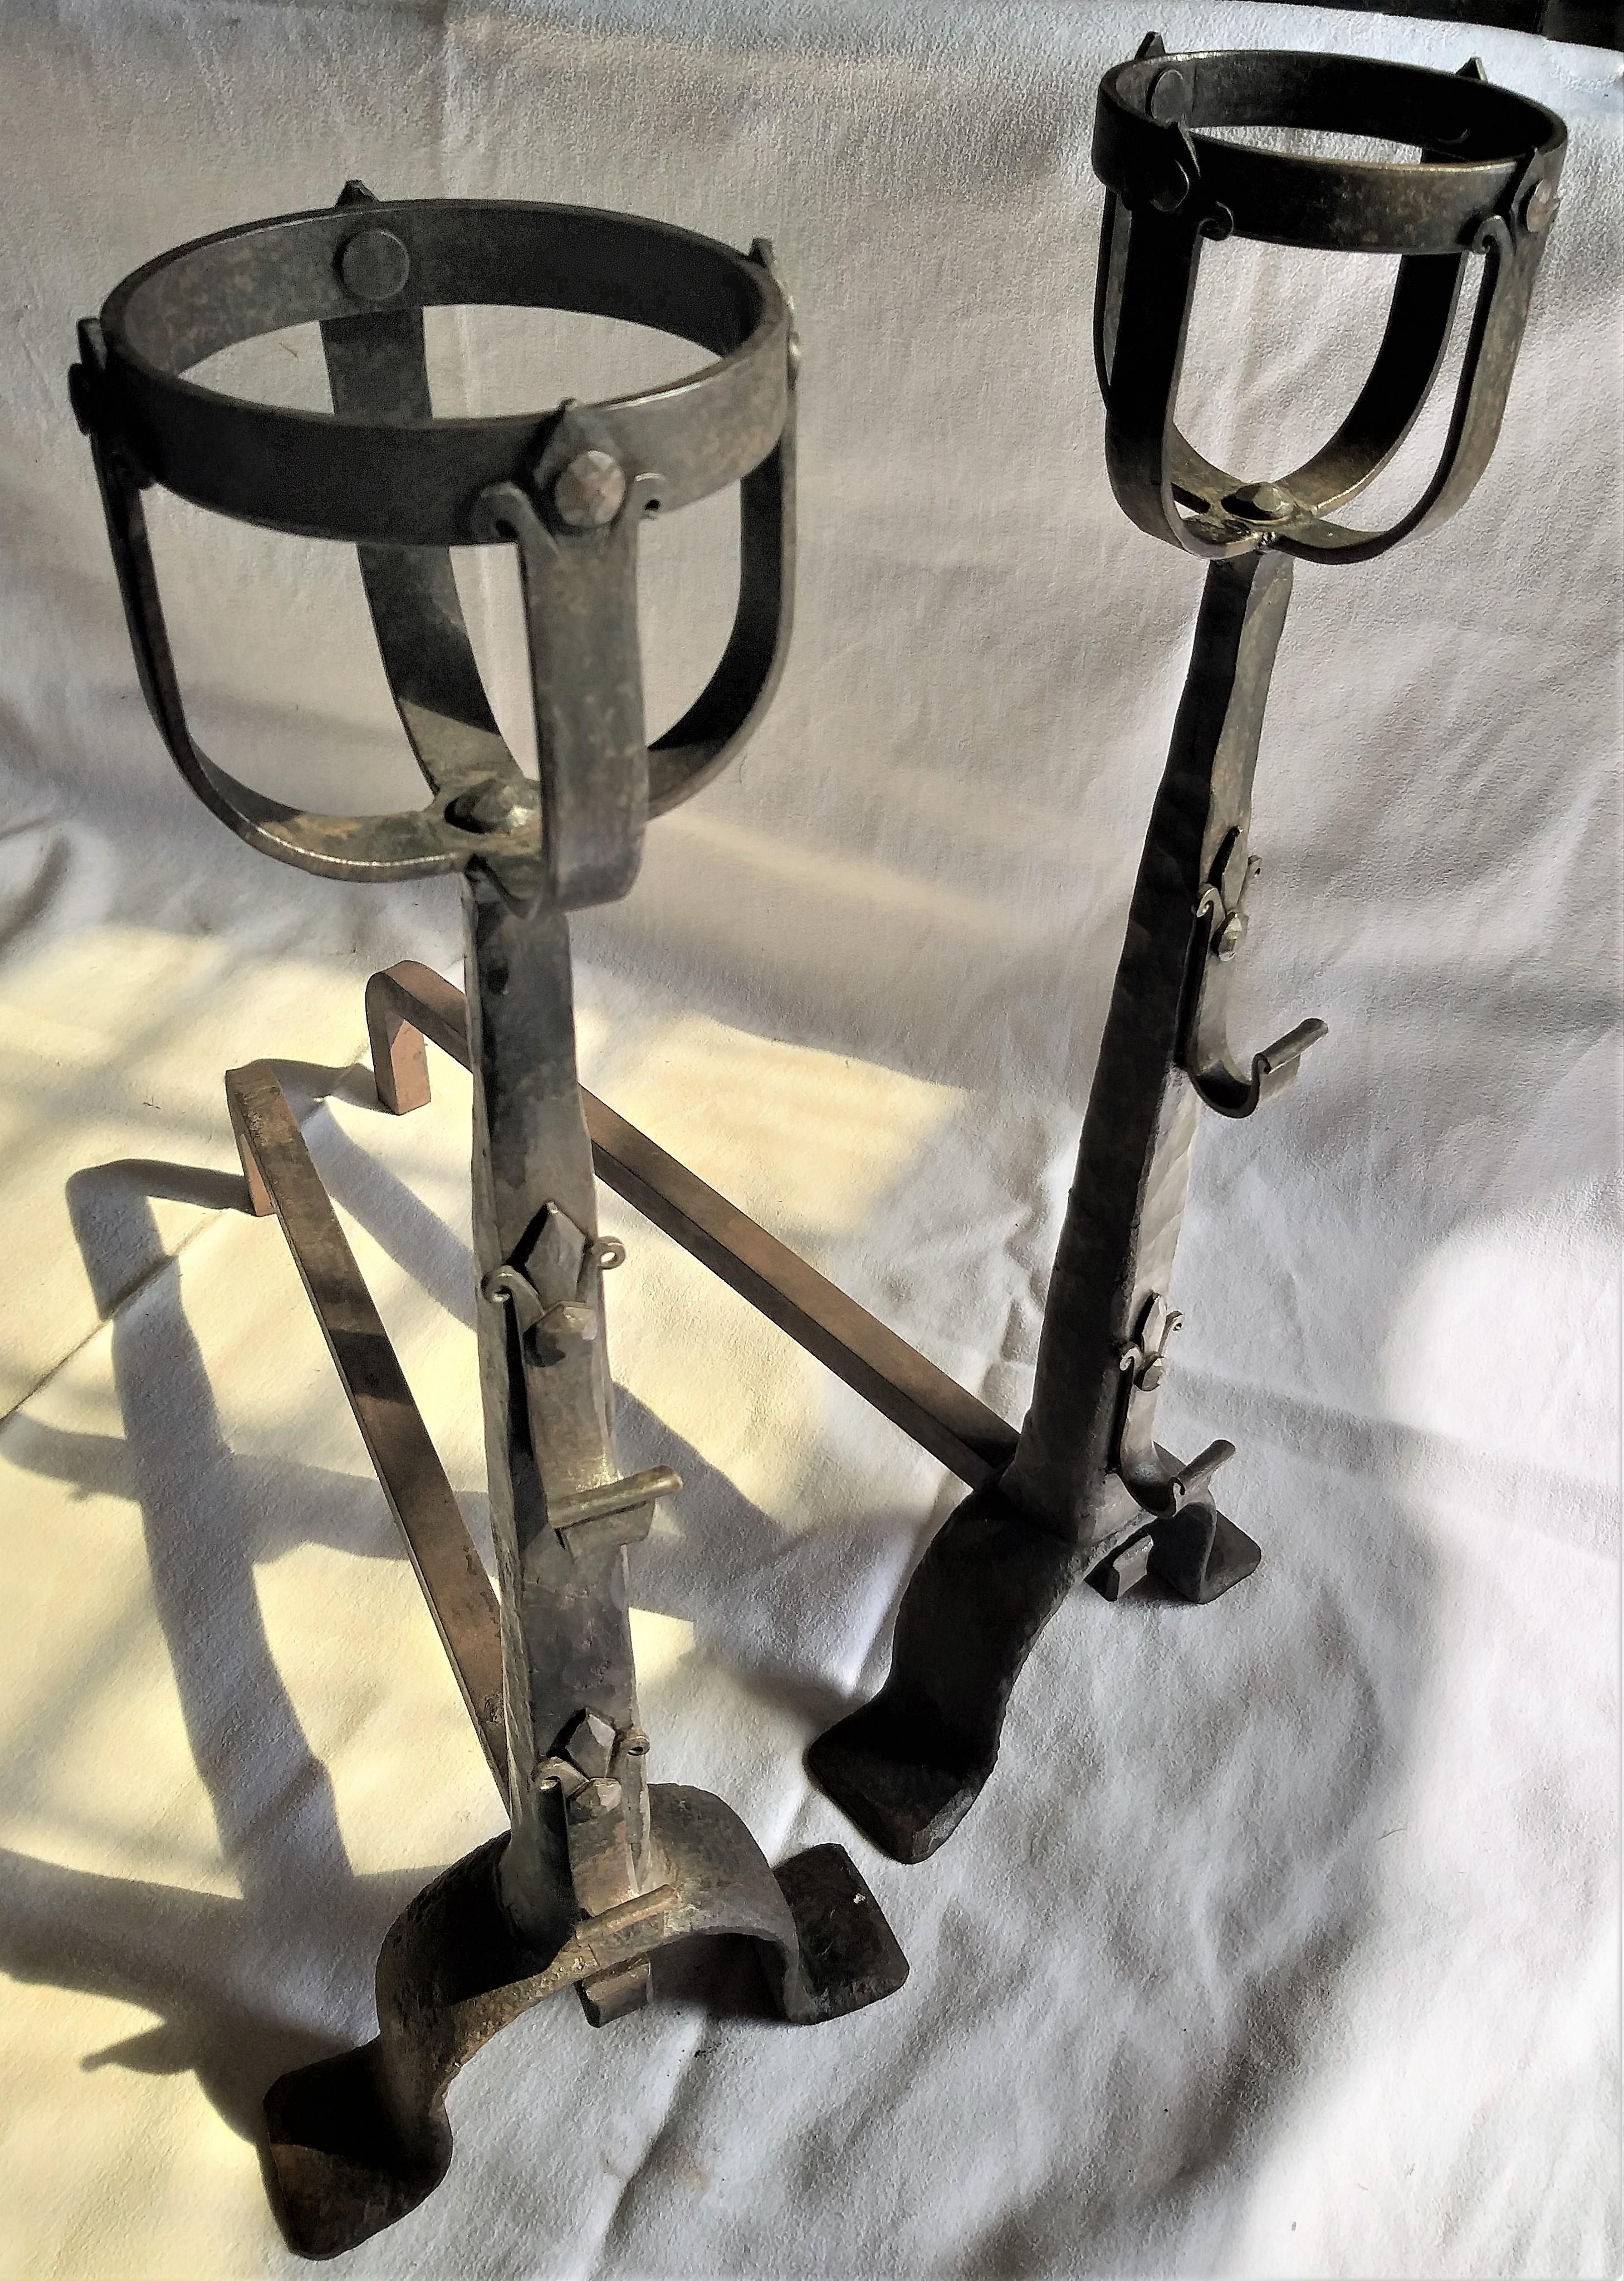 A large and early pair of 18th century iron endirons in very good vintage-used condition.
Included a cup-shaped top to hold 'porridge' ( a food, commonly eaten as a céreal-grain in milk. )
The original patina dues to age and use.
The horizontal bars